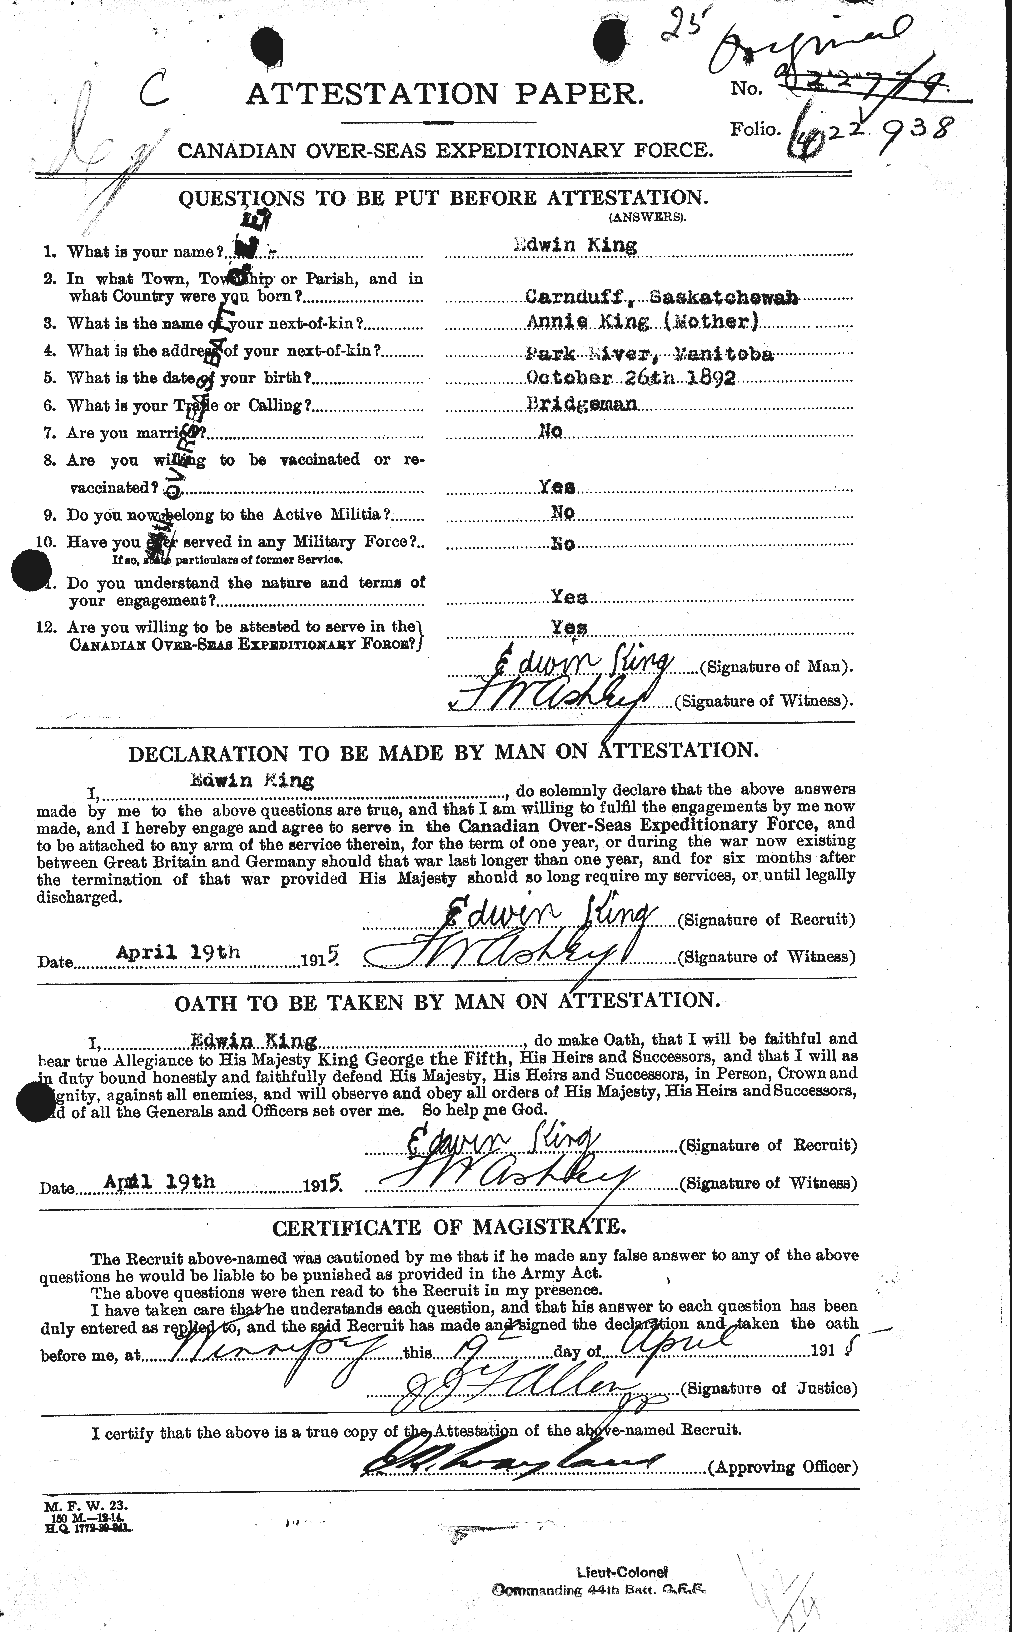 Personnel Records of the First World War - CEF 437876a